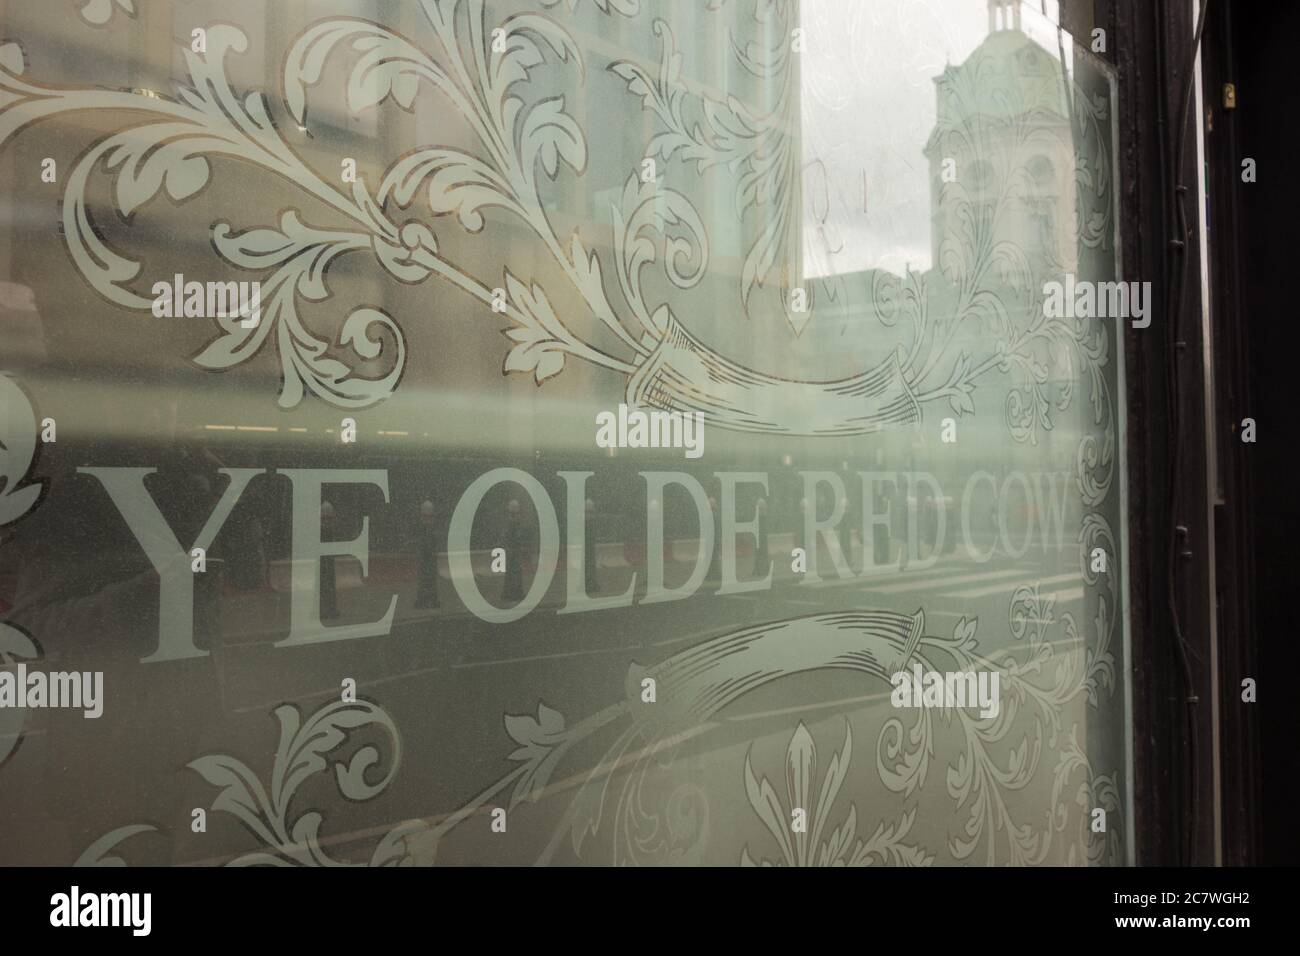 Closeup of the frosted glass window of the Ye Olde Red Cow public house in  Smithfield, London, UK Stock Photo - Alamy